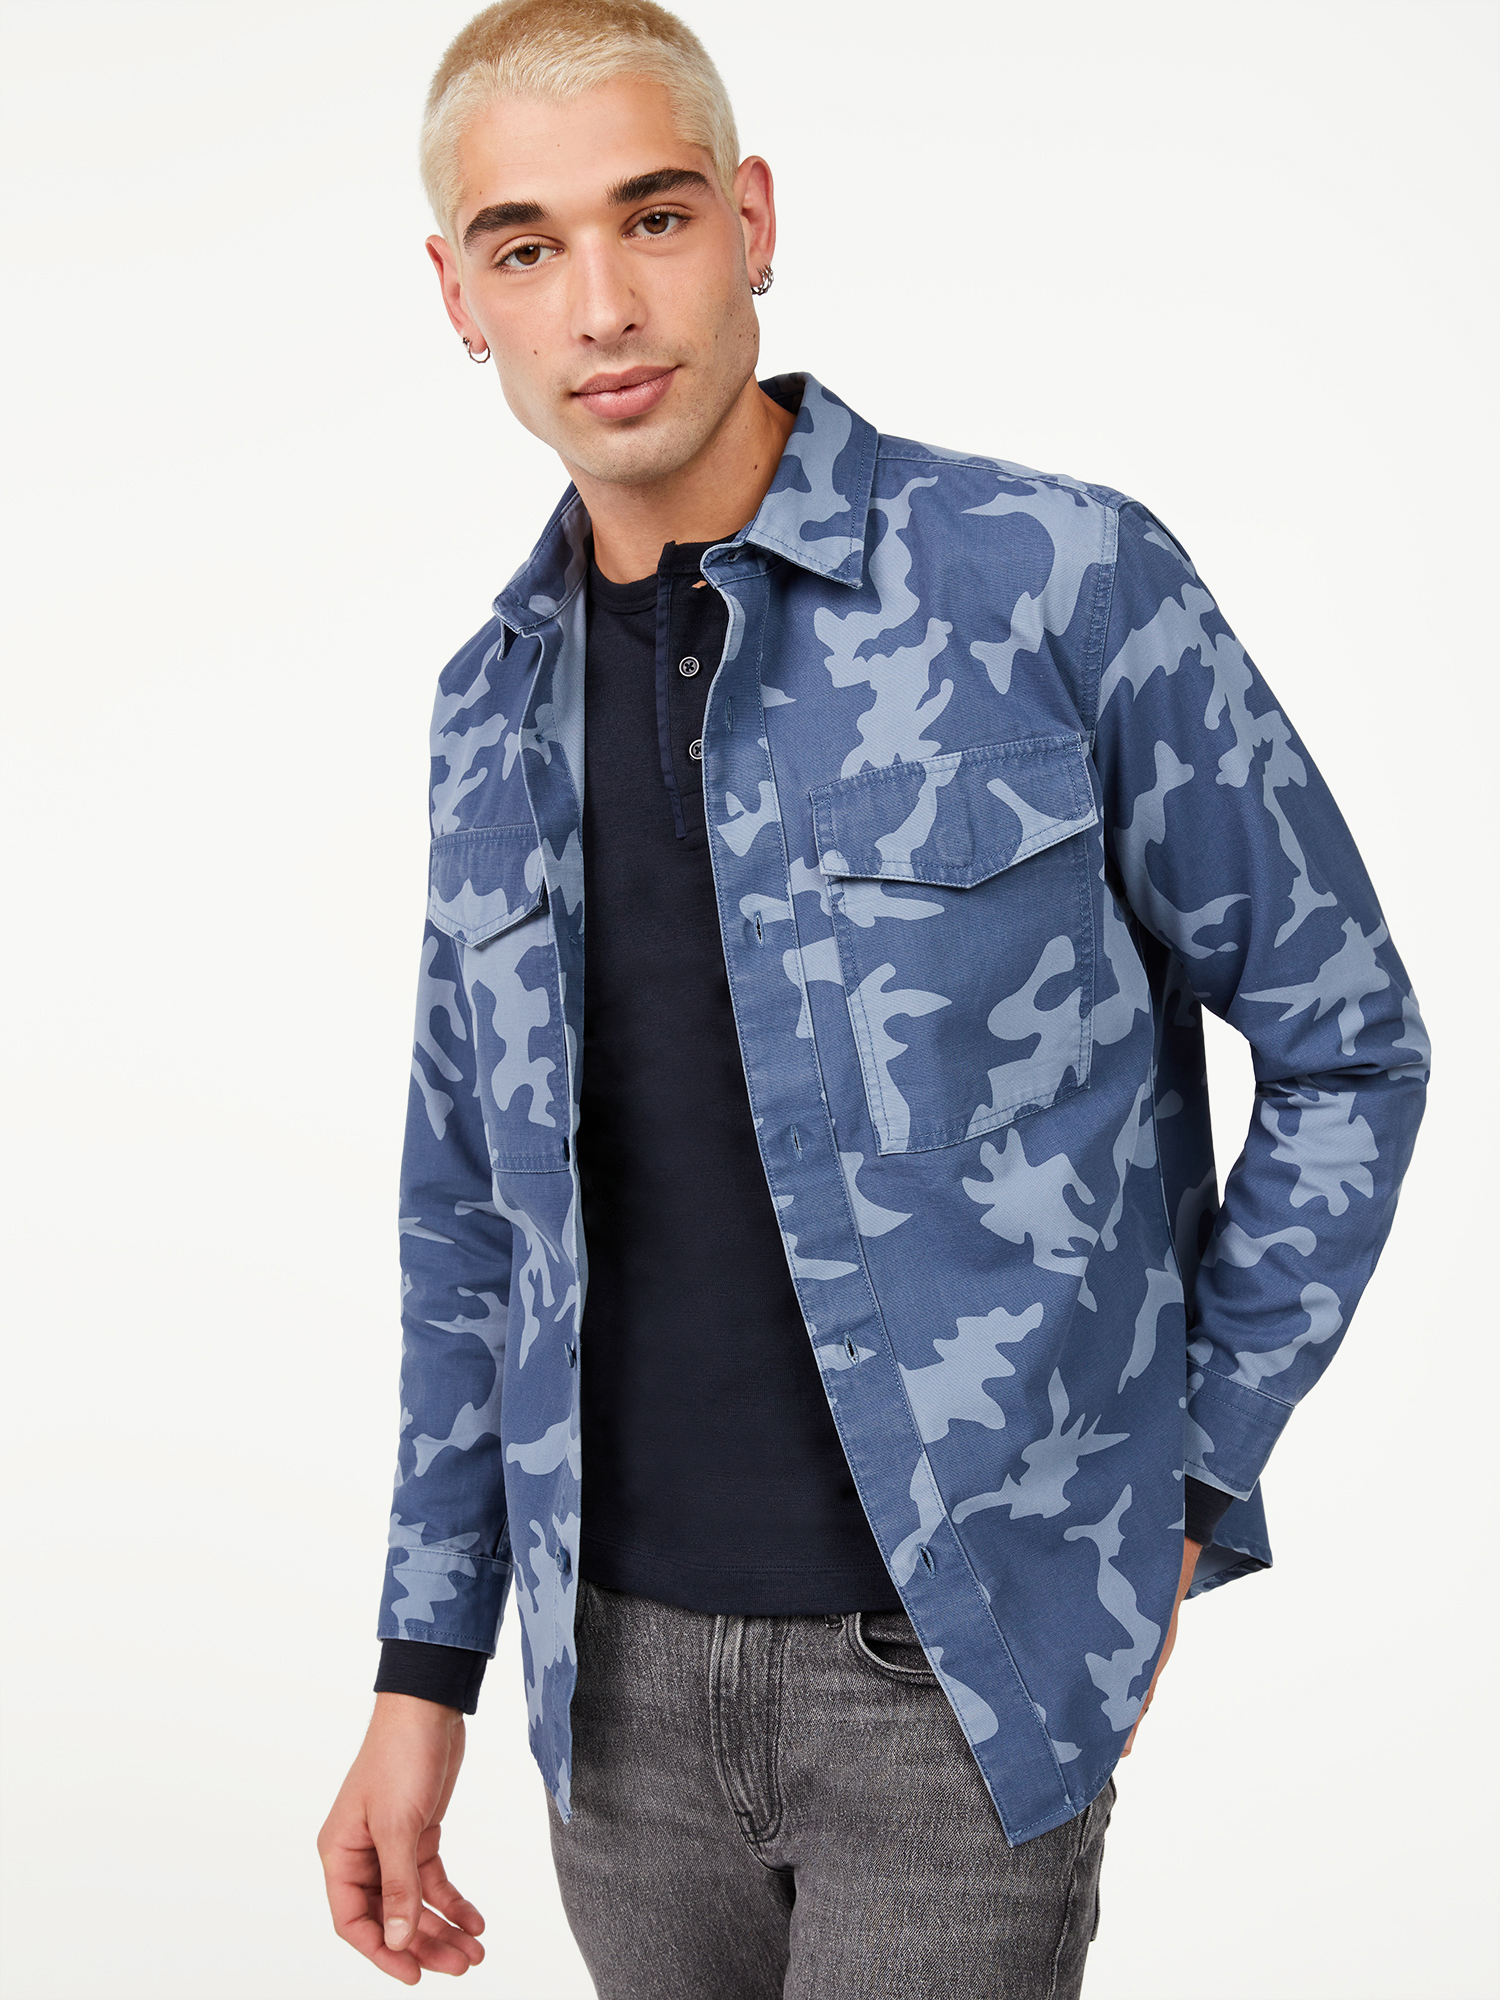 Free Assembly Men's Cotton Canvas Shirt Jacket - image 1 of 5